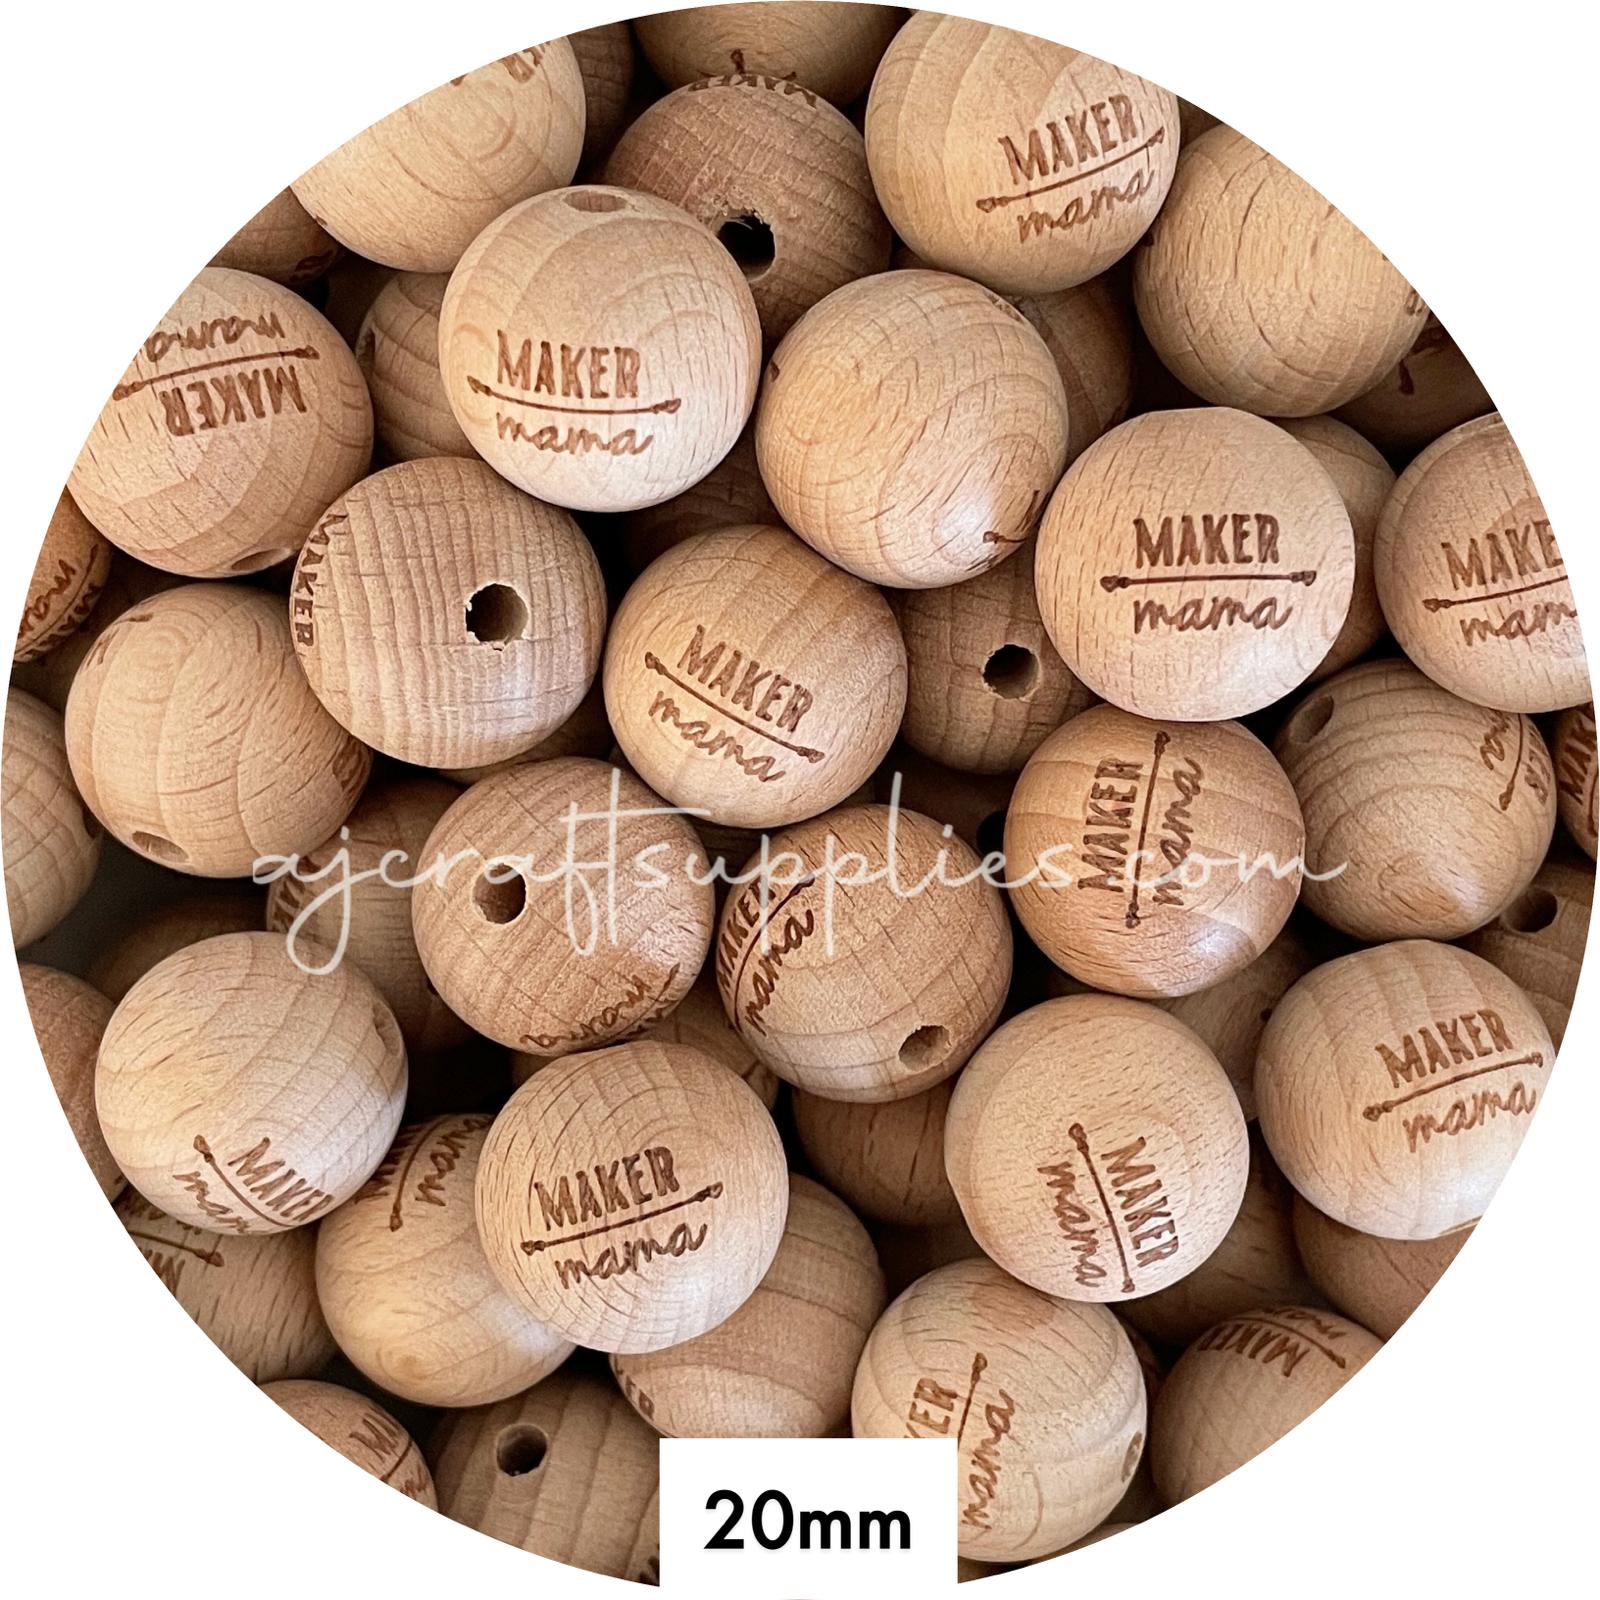 *CLEARANCE* Beech Wood Engraved Beads (Maker Mama) - 20mm Round - 5 beads *CLEARANCE*